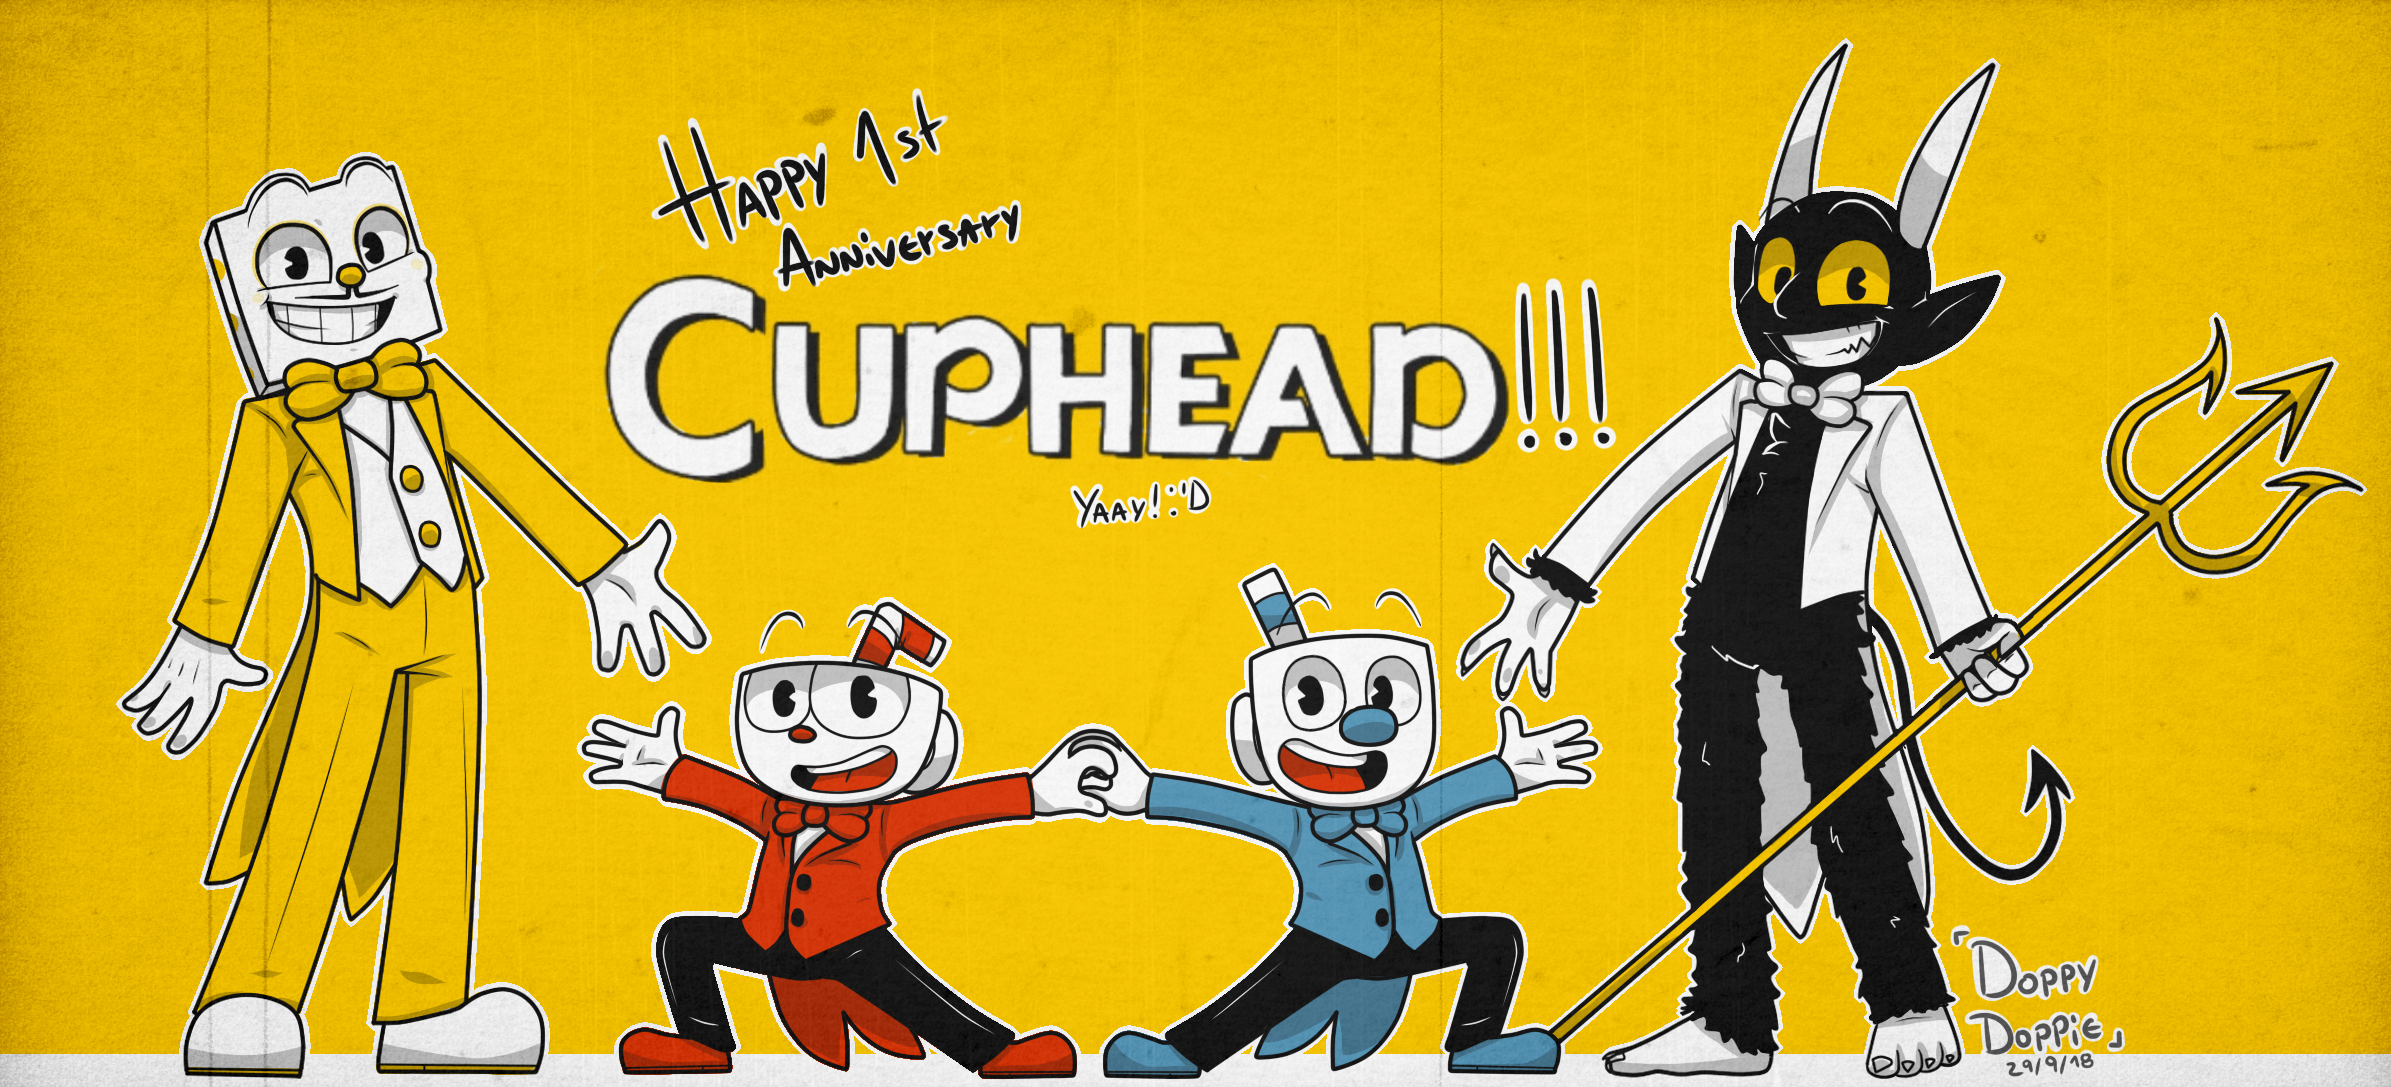 cuphead and mugman wallpaper by vogold  Fur Affinity dot net